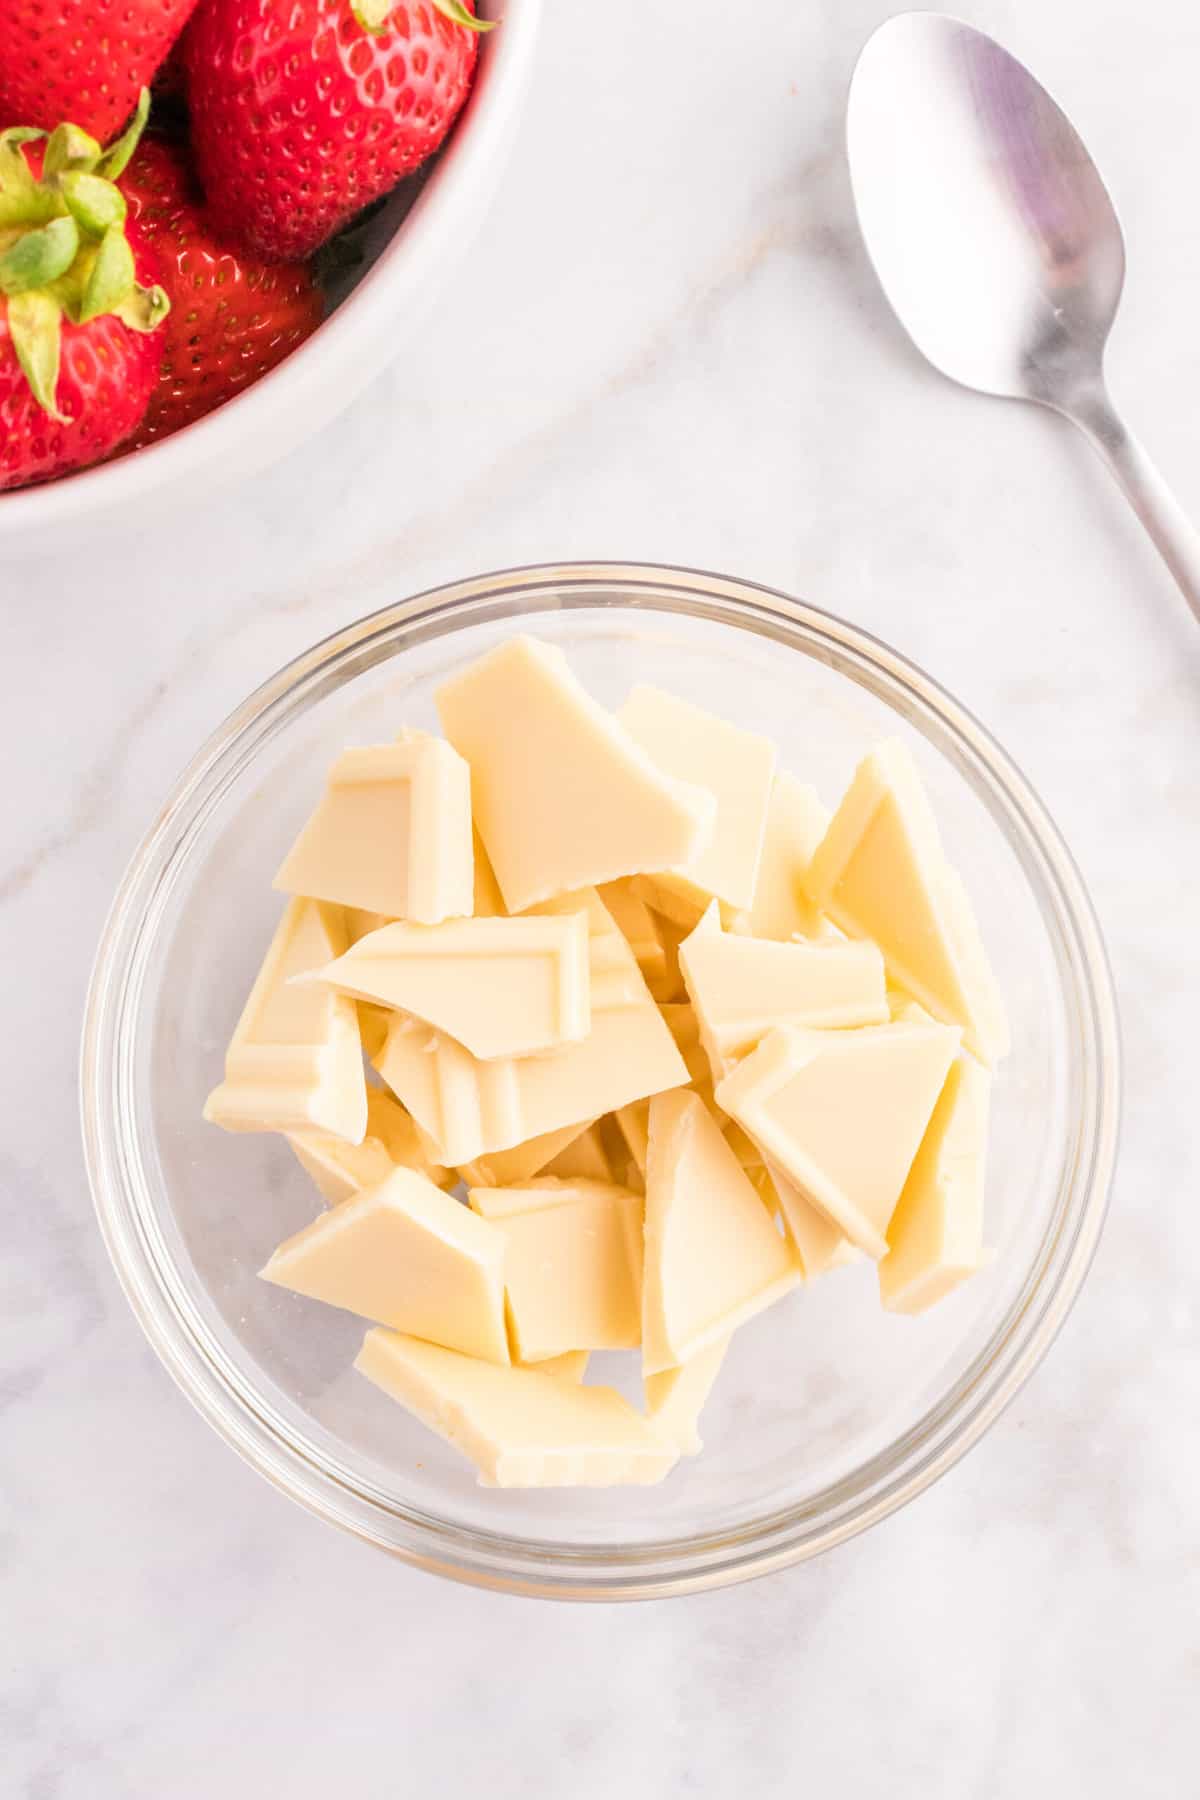 Break up the White chocolate in a glass bowl.